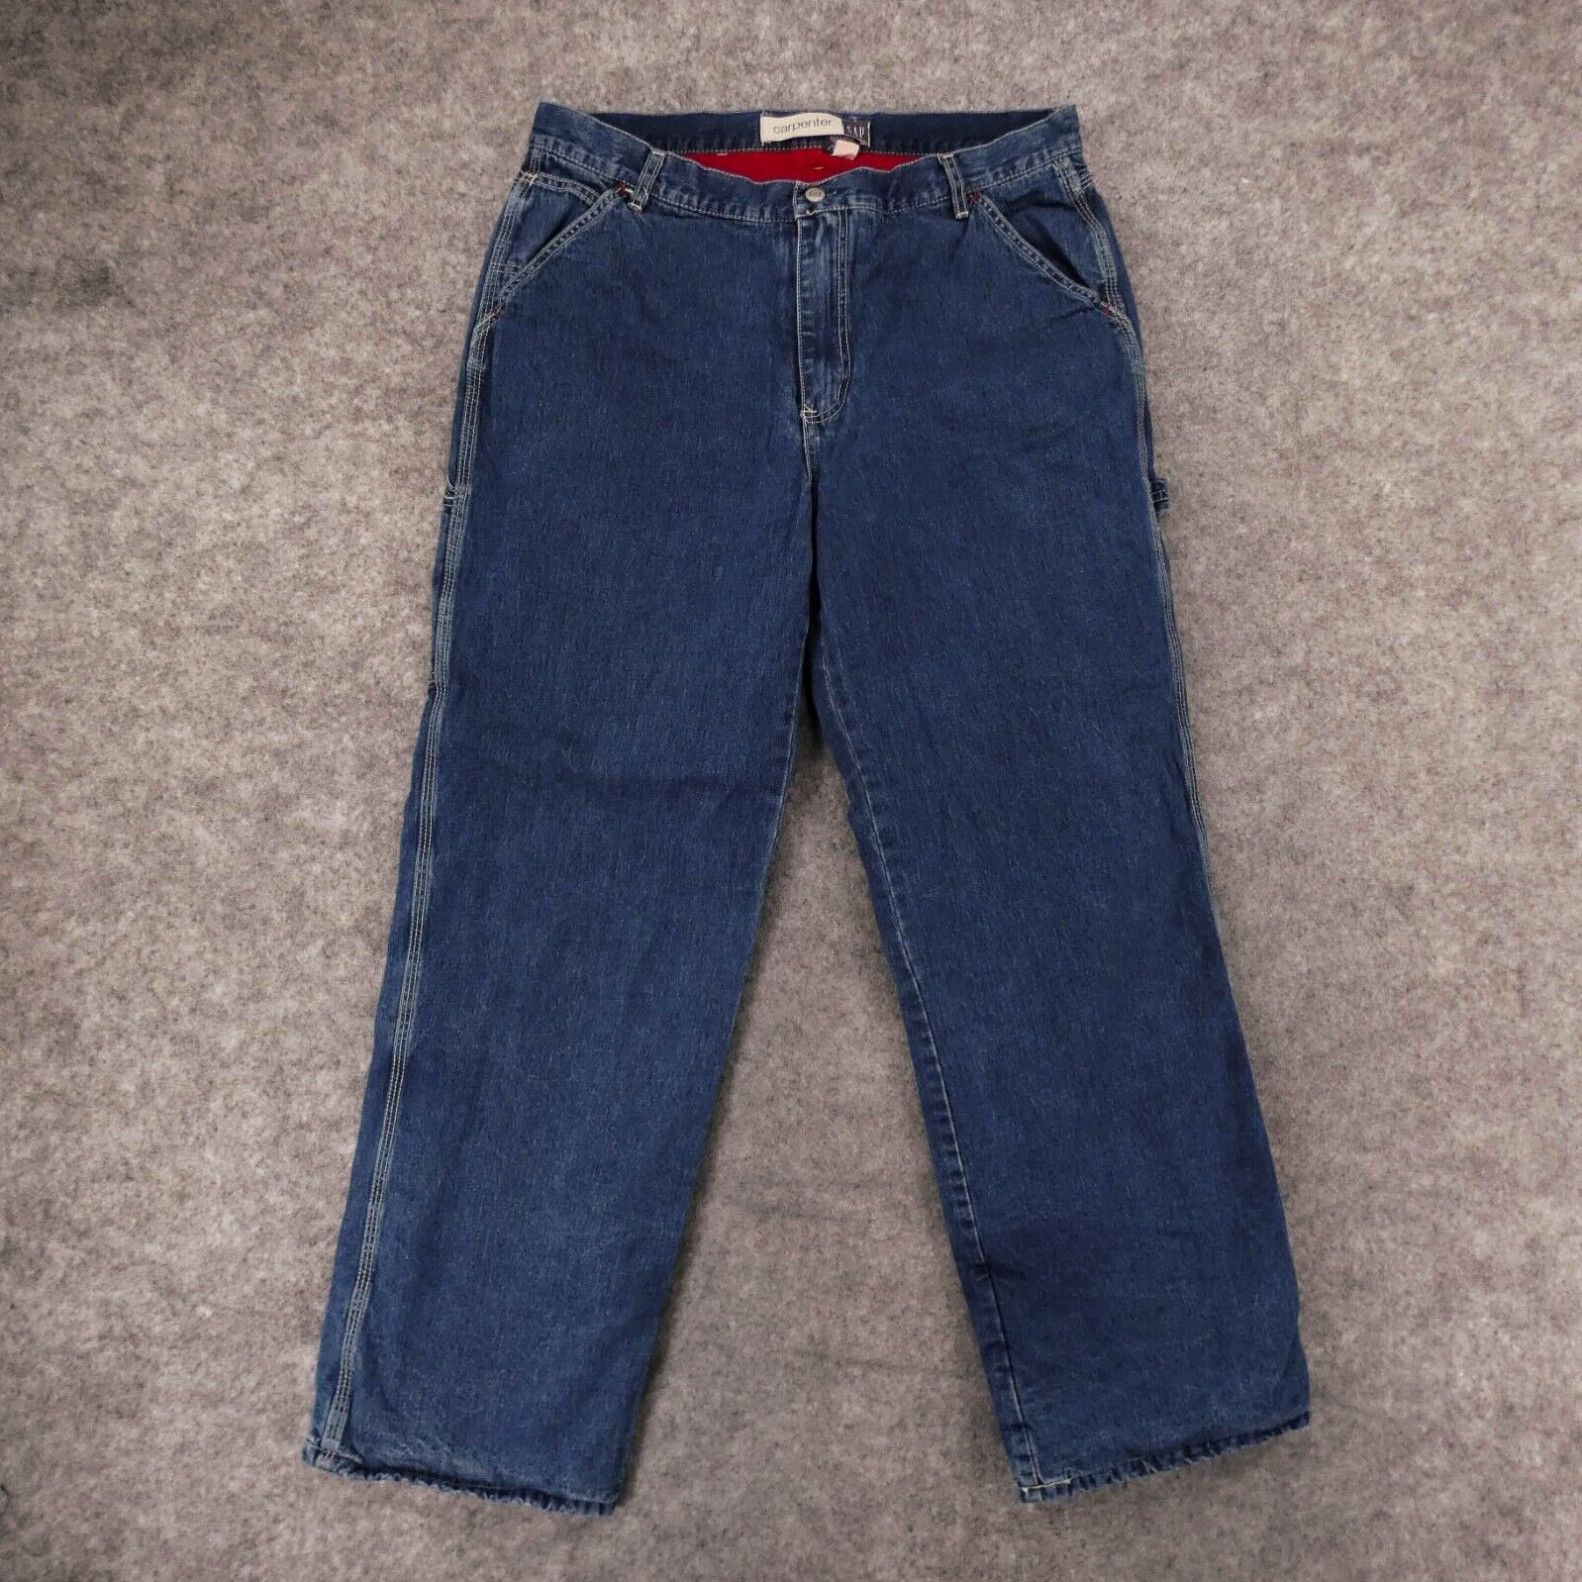 Gap Gap Carpenter Jeans Womens 14 Fleece Lined High Rise Med Wash Y2K Vintage Size ONE SIZE - 1 Preview